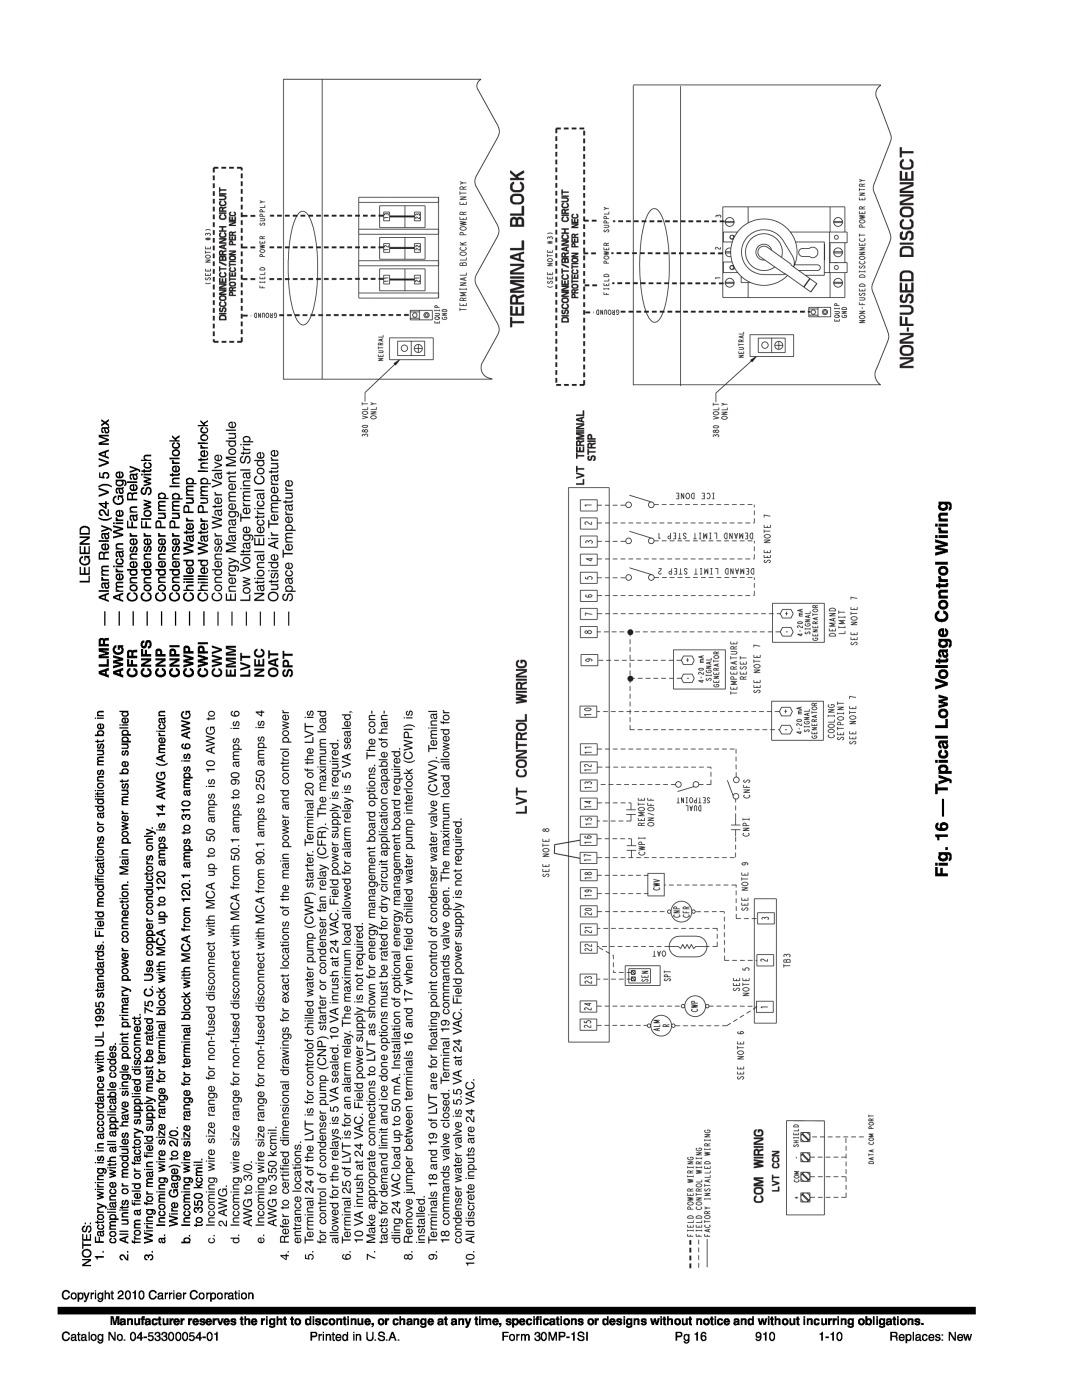 Carrier 30MPA installation instructions a30-5039, Typical Low Voltage Control Wiring 